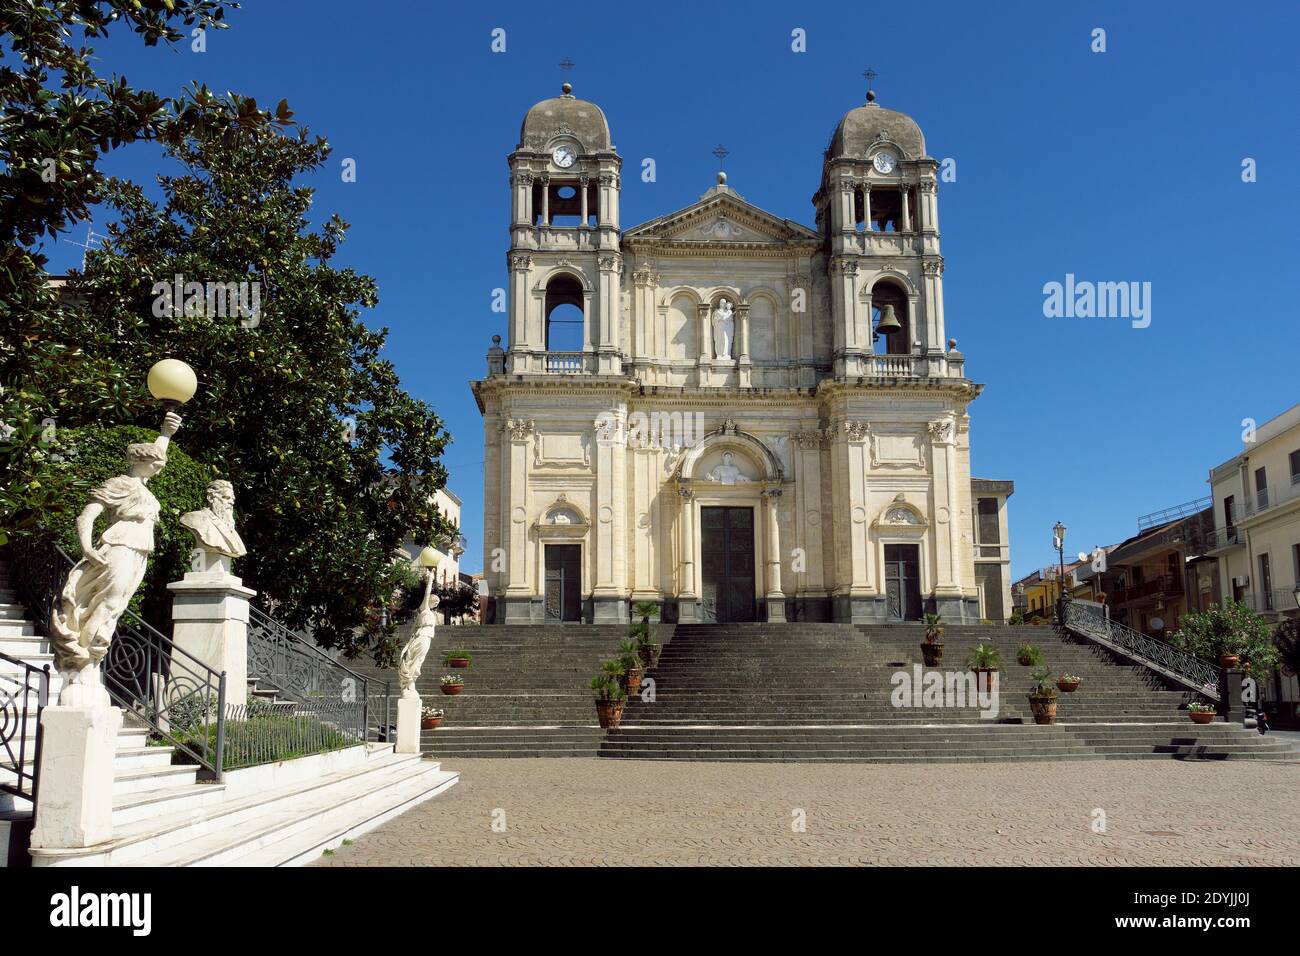 Duomo in Zafferana Etnea town of Sicily and evidence of architecture and culture Stock Photo